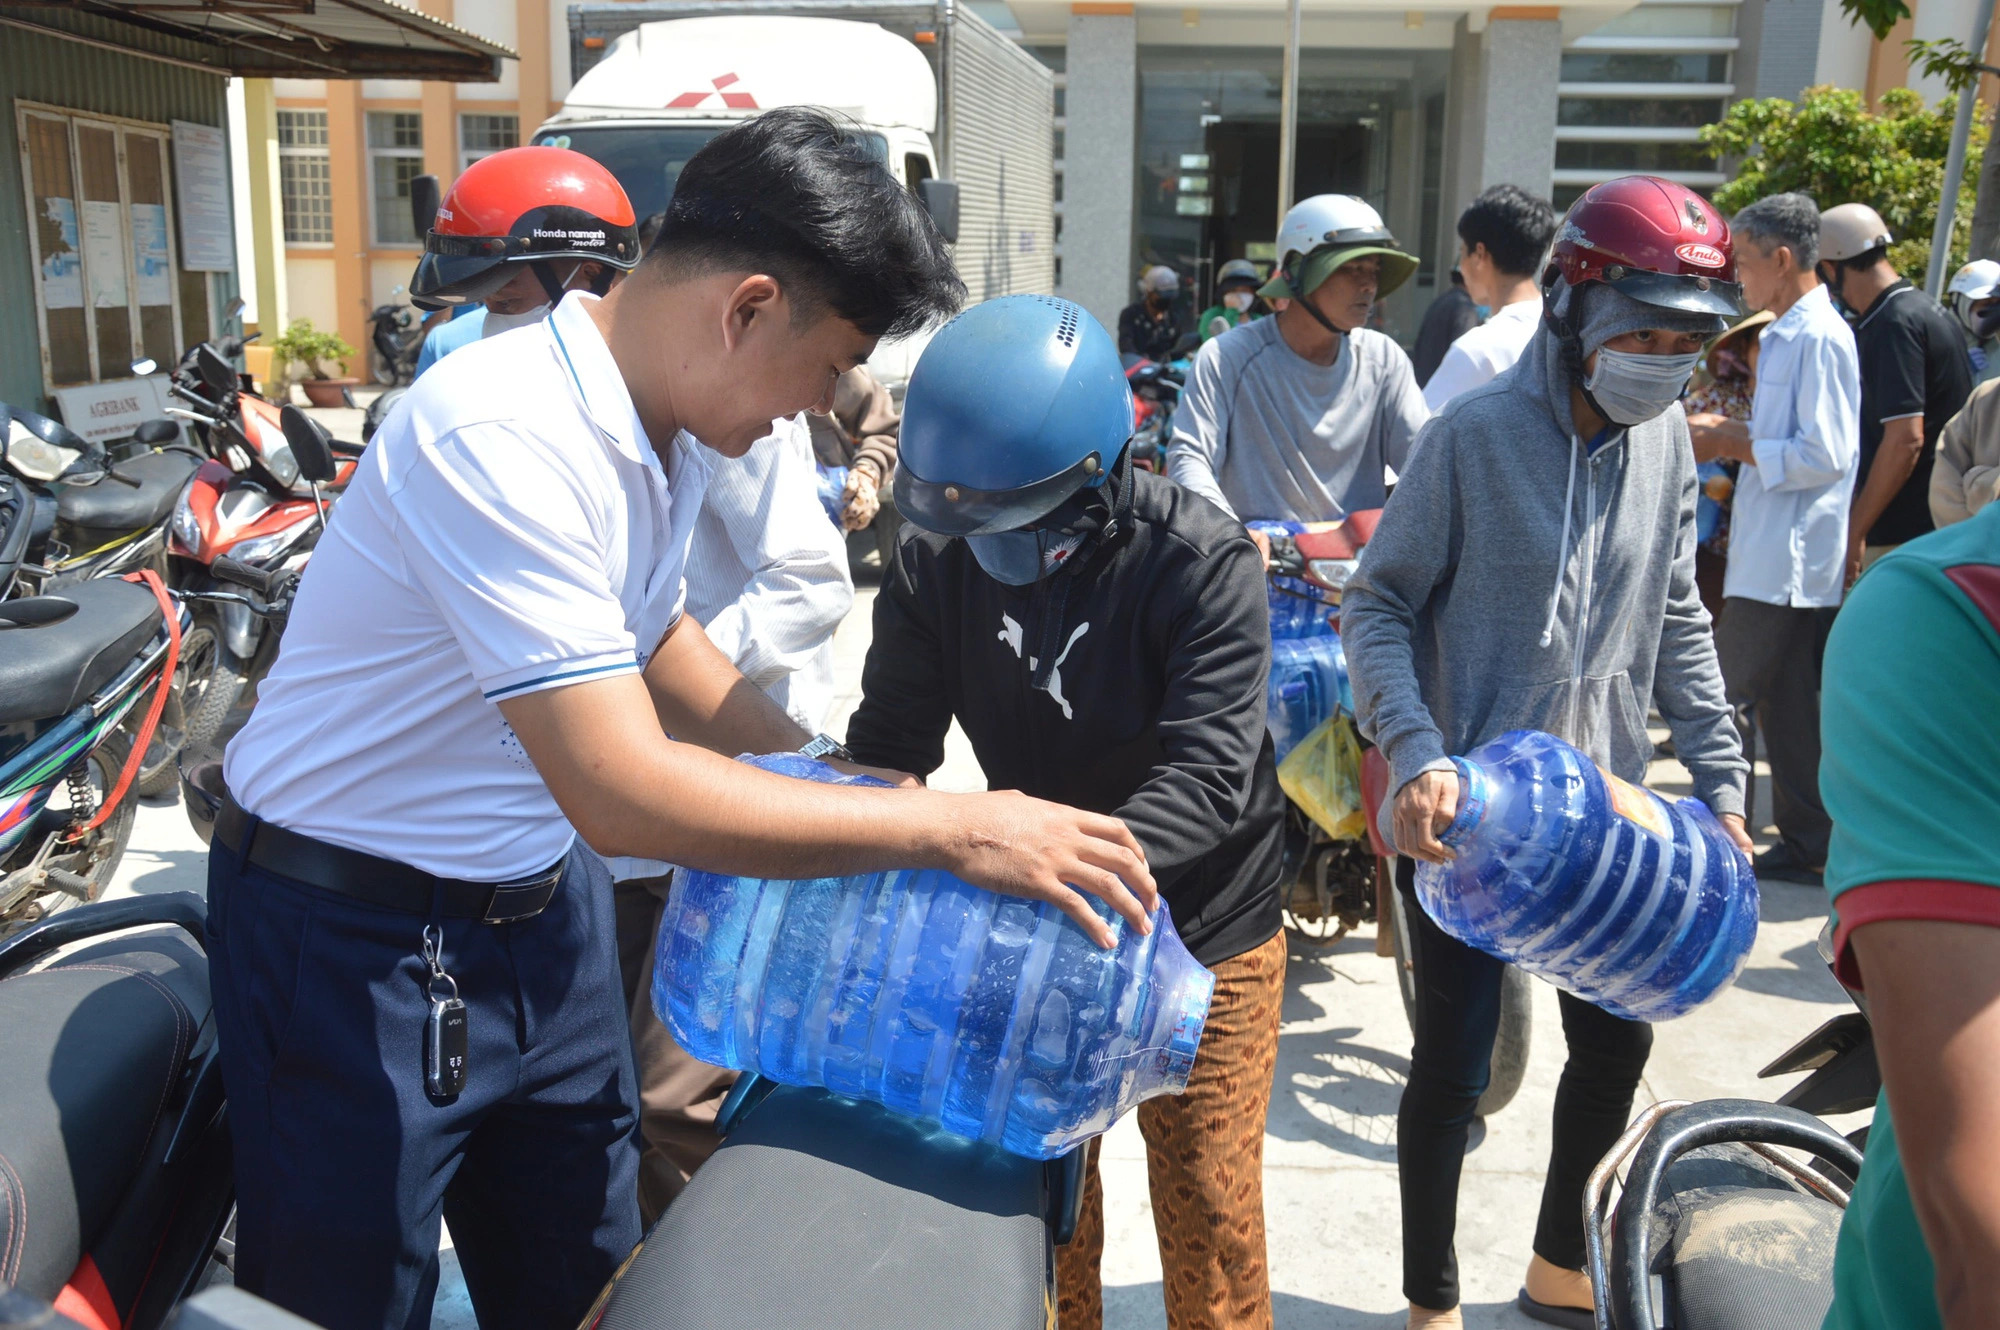 Aside from fresh water, many units present water containers to the affected residents. Photo: Mau Truong / Tuoi Tre